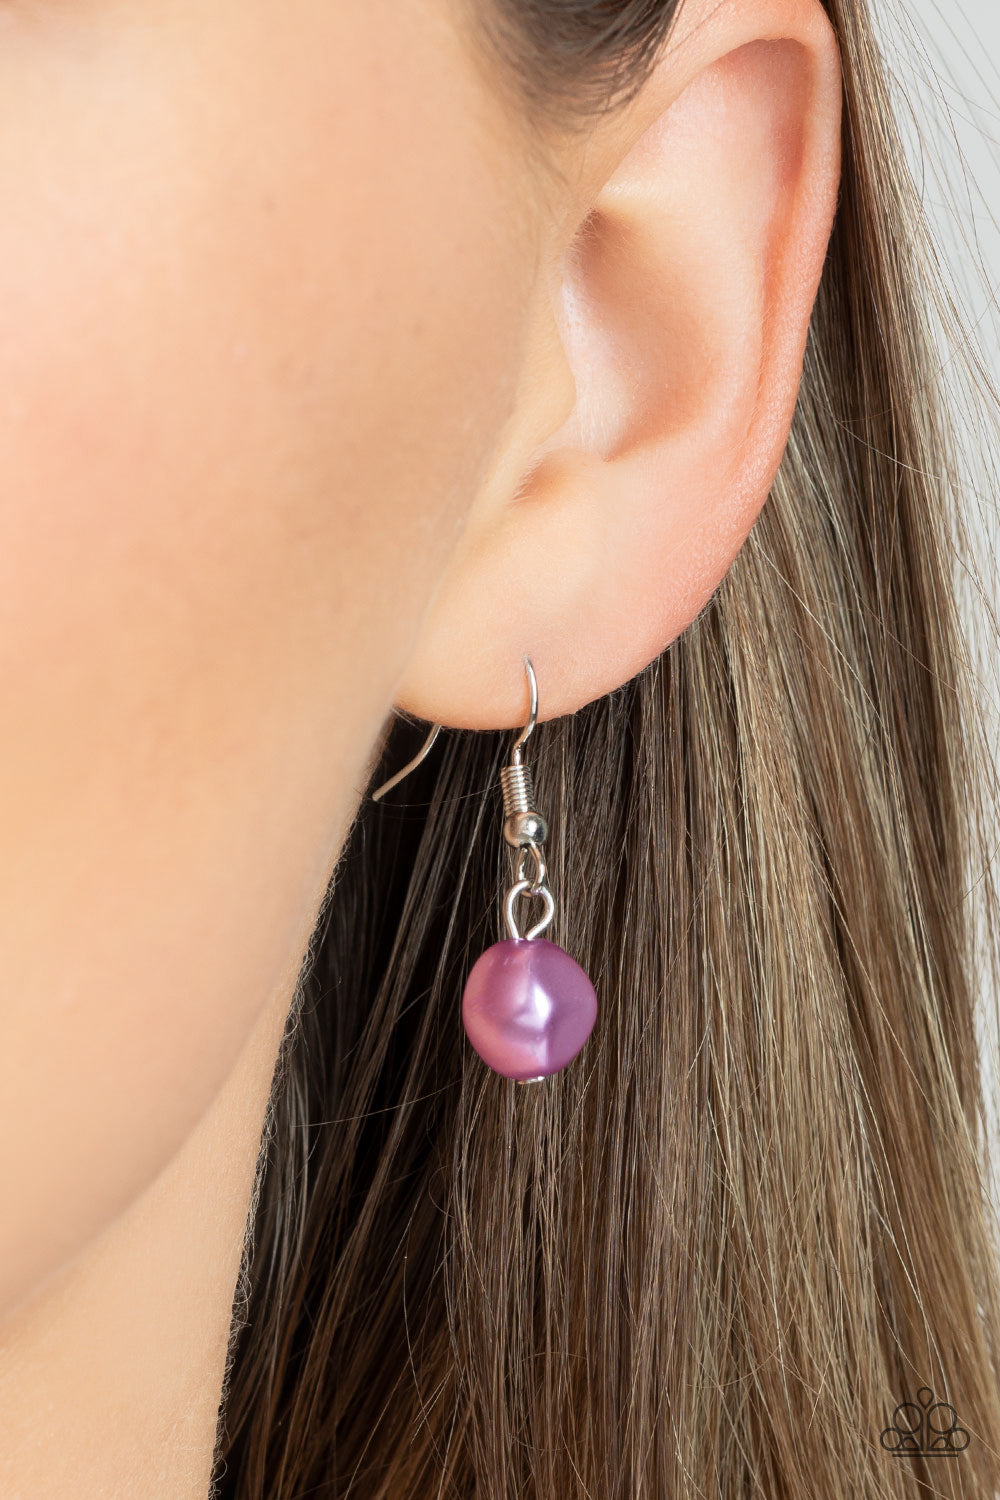 Think of the POSH-ibilities! - Purple Pearls & Silver Ring Paparazzi Necklace & matching earrings